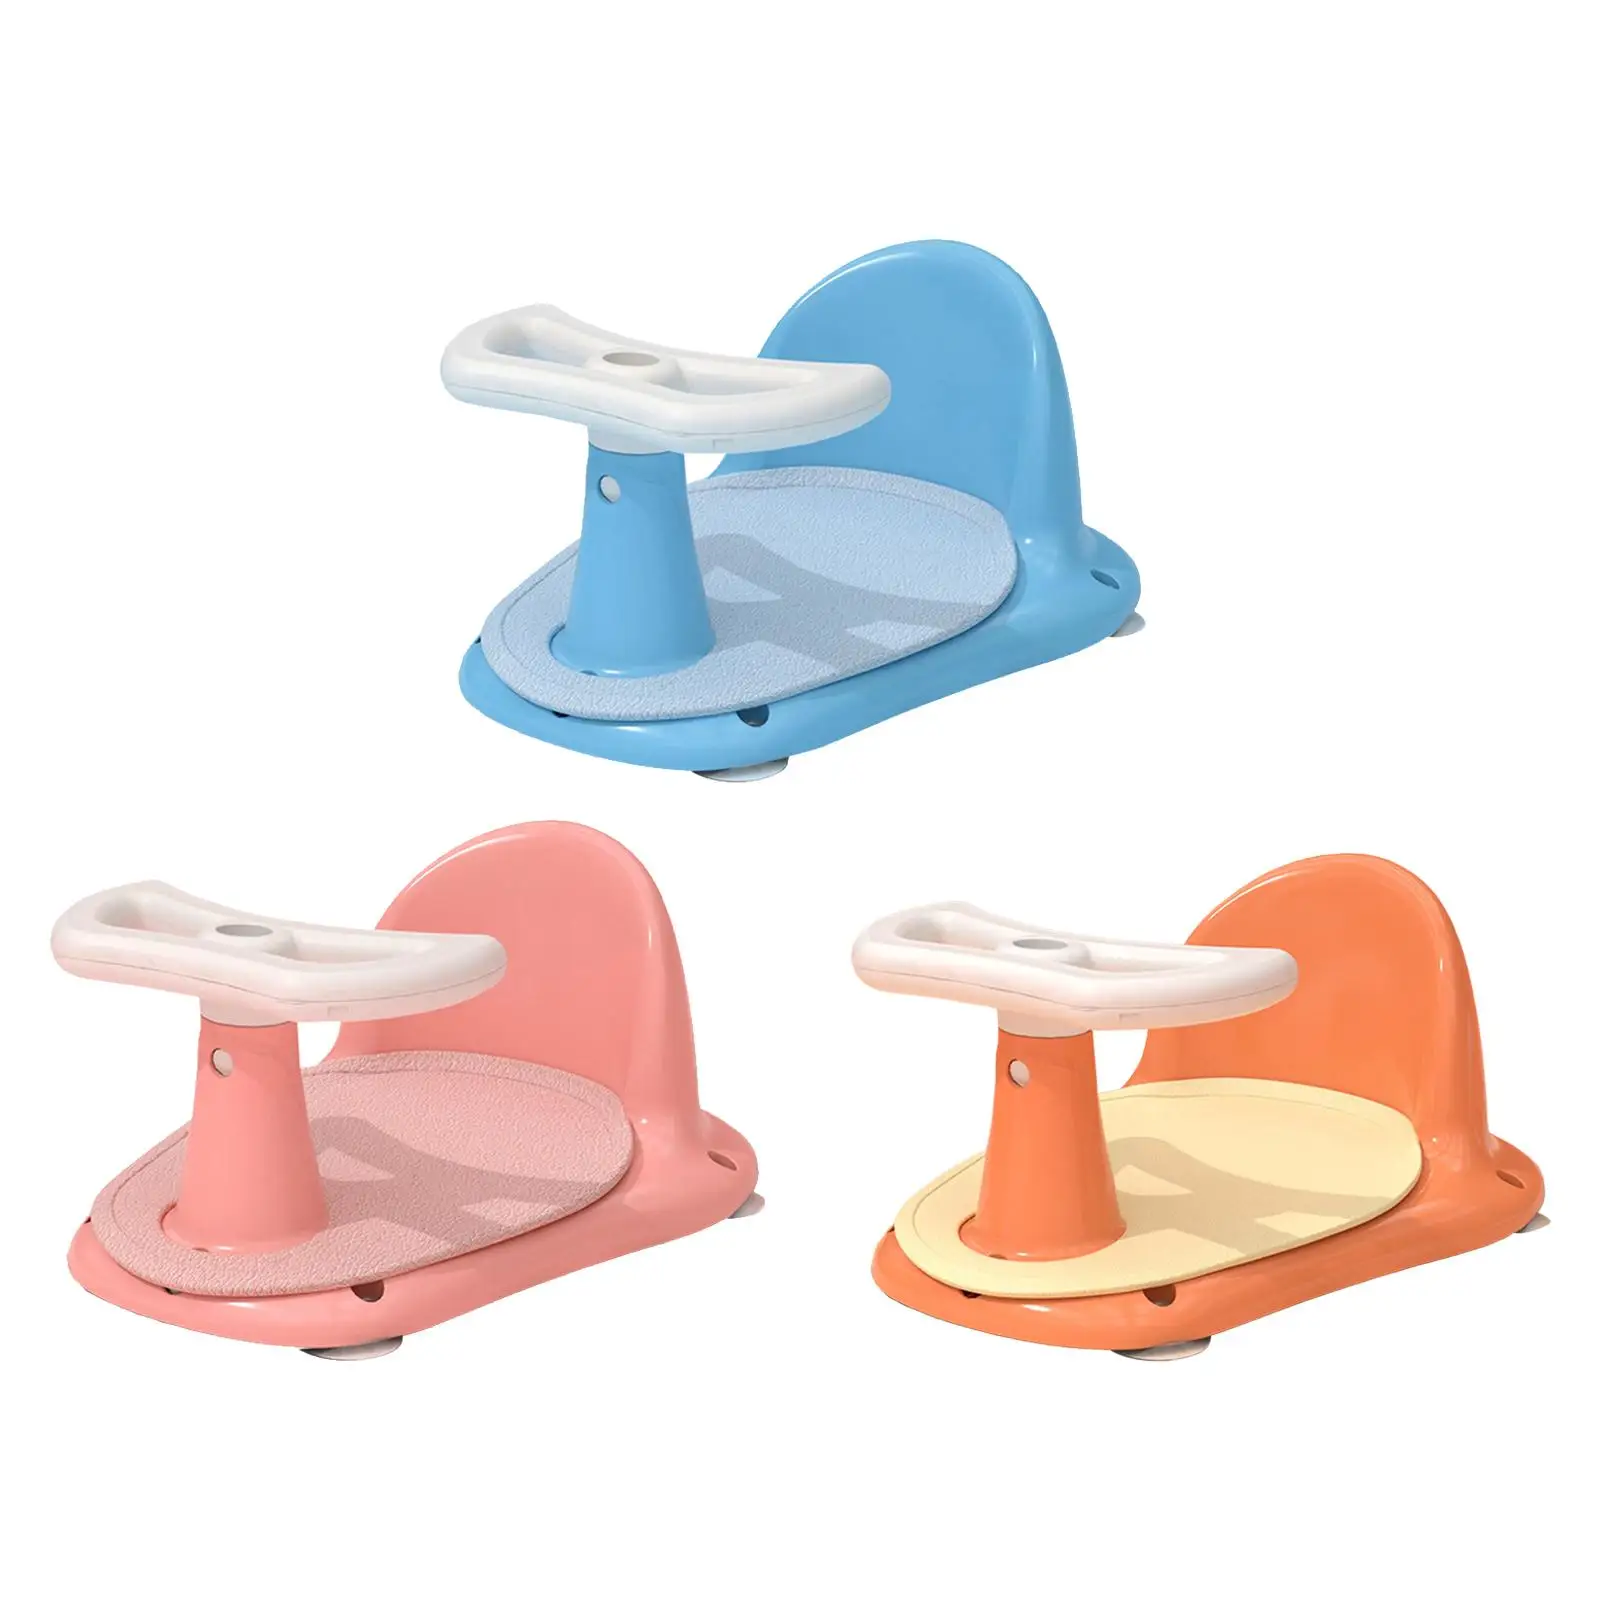 Cute Infant Bath Tub Seat Tub Sitting up with Anti Slip Mat Suction Bath Seat Support Steering Wheel Design for Baby Newborn